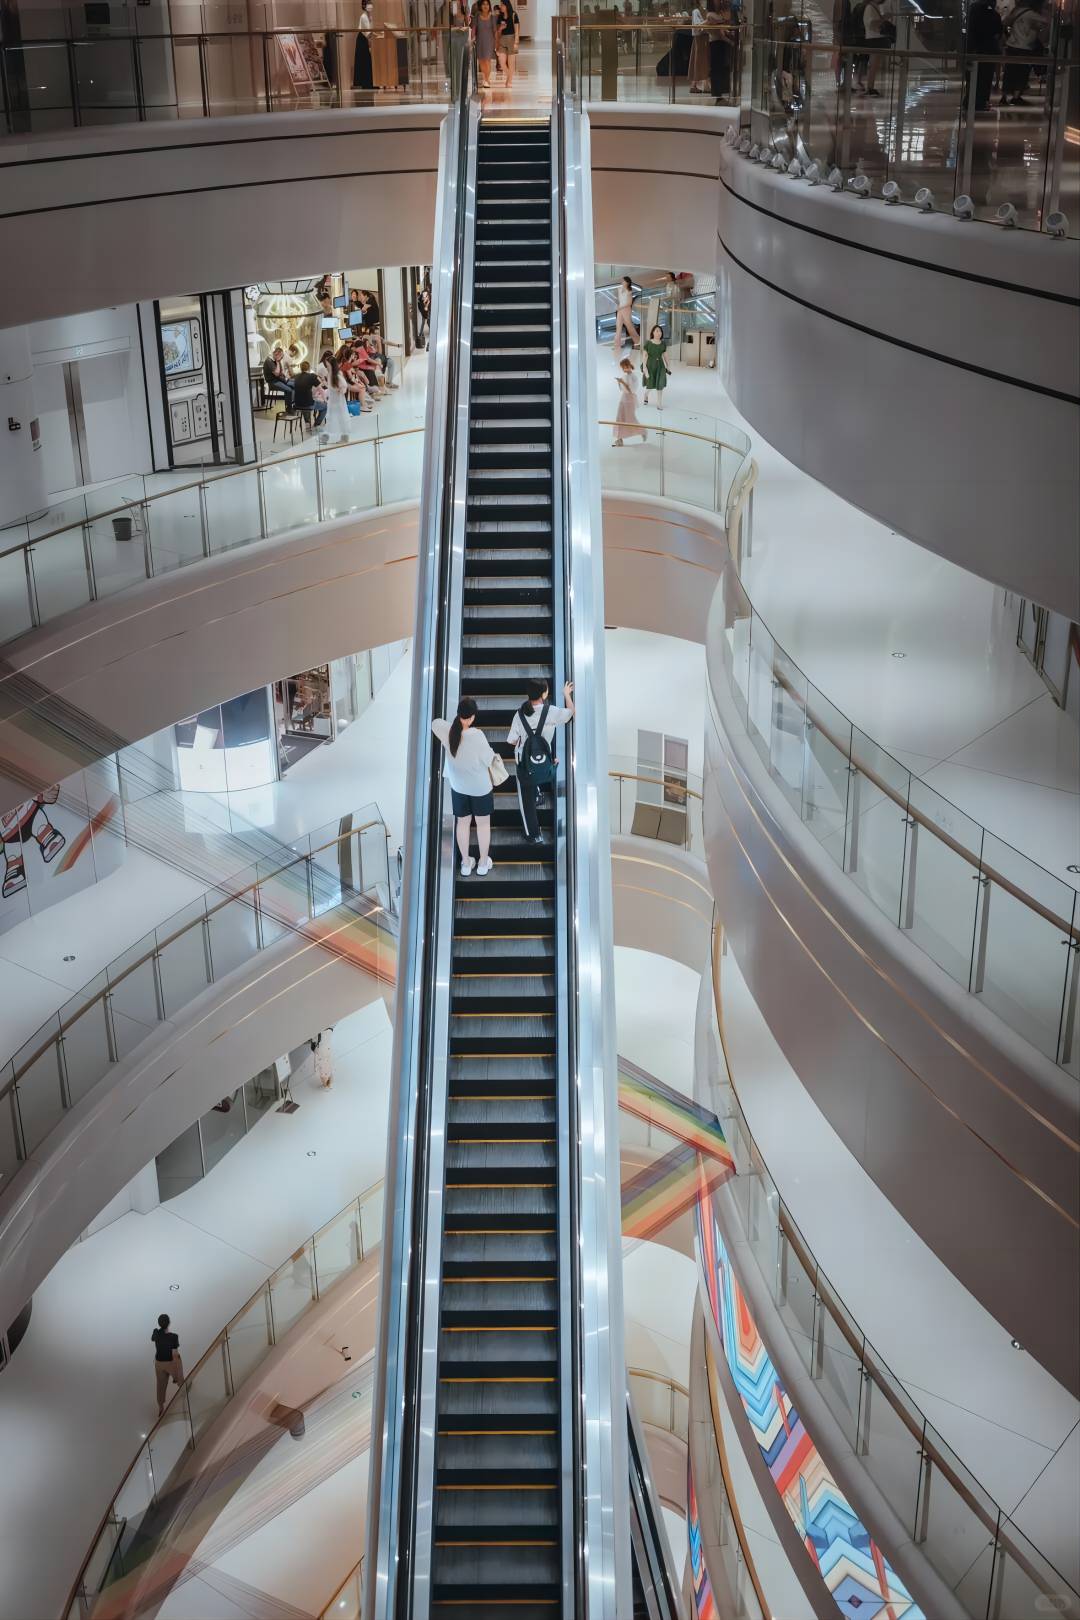 What should I do if I have an accident when riding the shopping centre escalator?